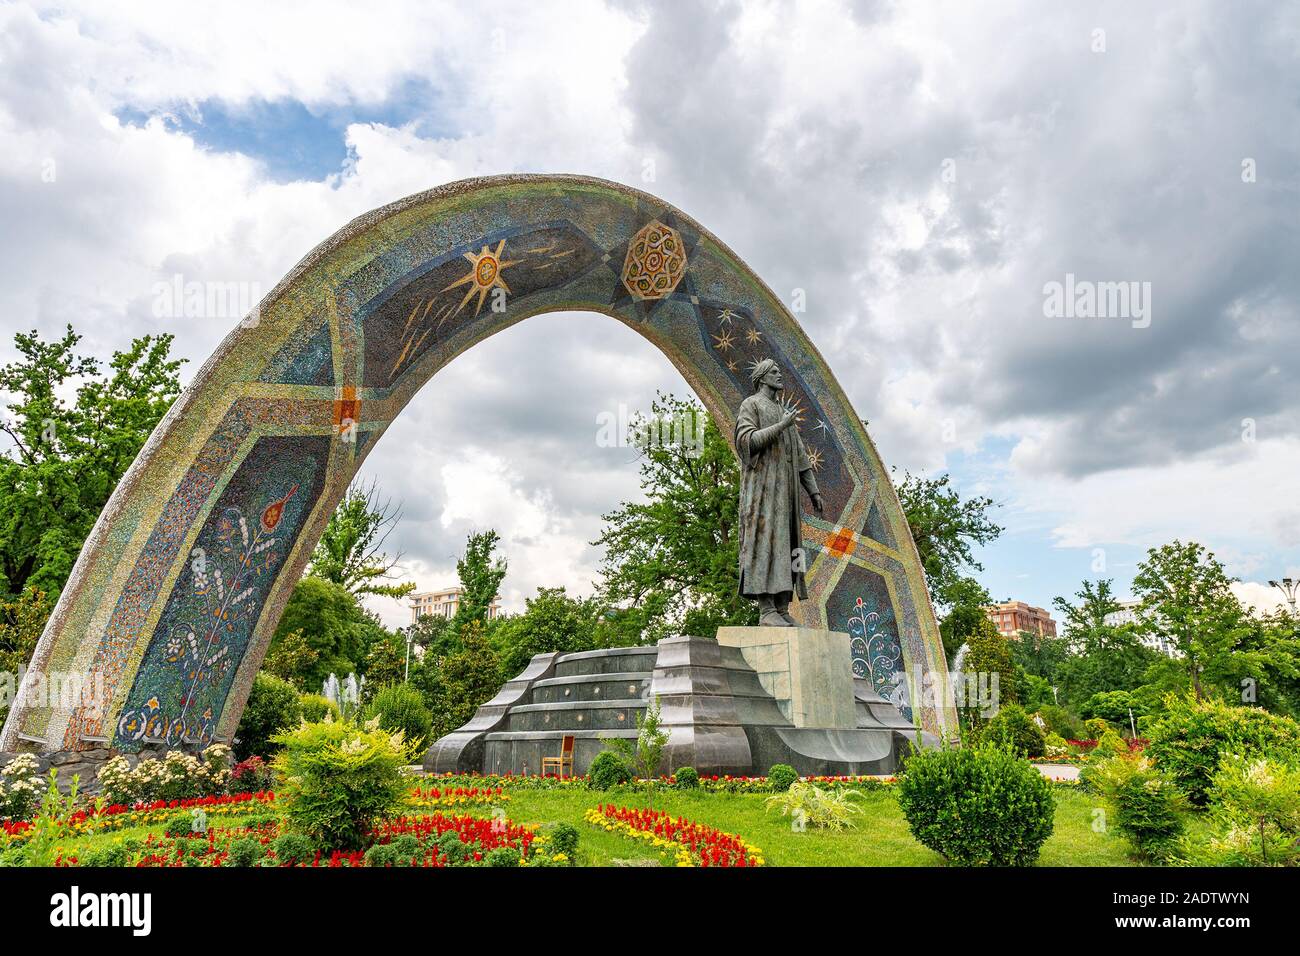 Dushanbe Abu Abdullah Rudaki Park Statue Picturesque Side View on a Cloudy Rainy Day Stock Photo